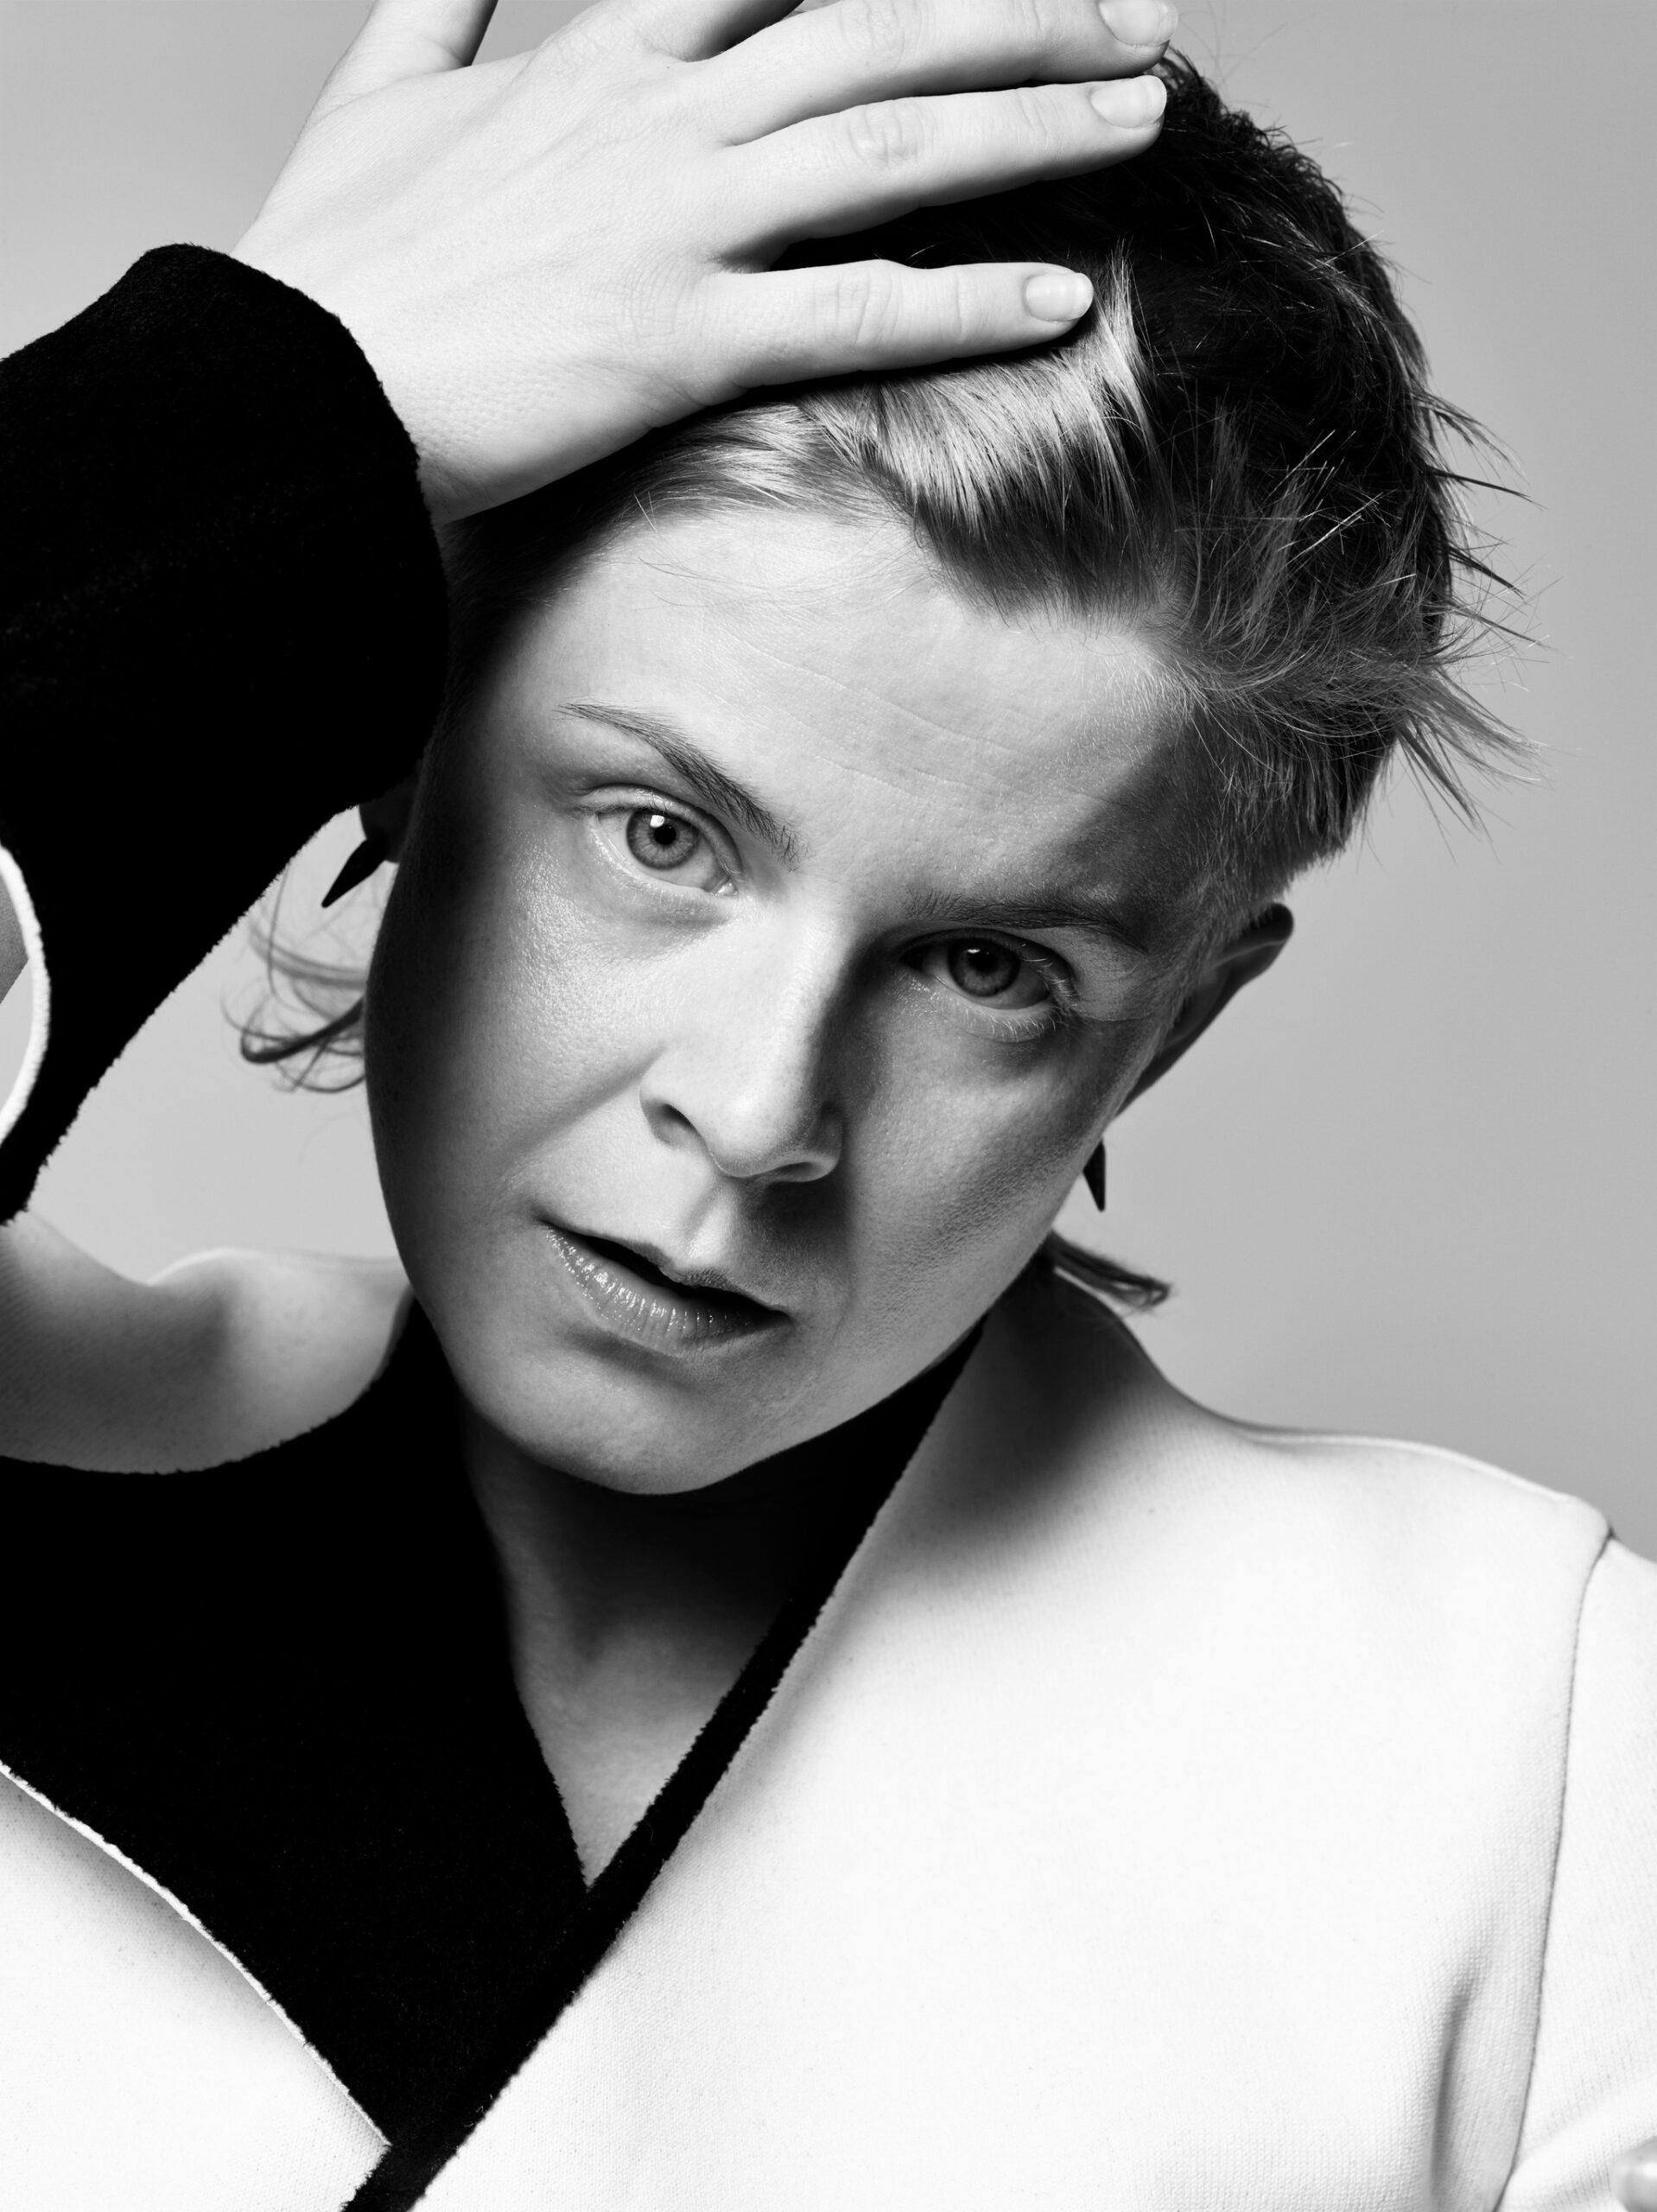 A black-and-white photo of Robyn, holding one hand on her head. Robyn is the pop queen of Swedish music.